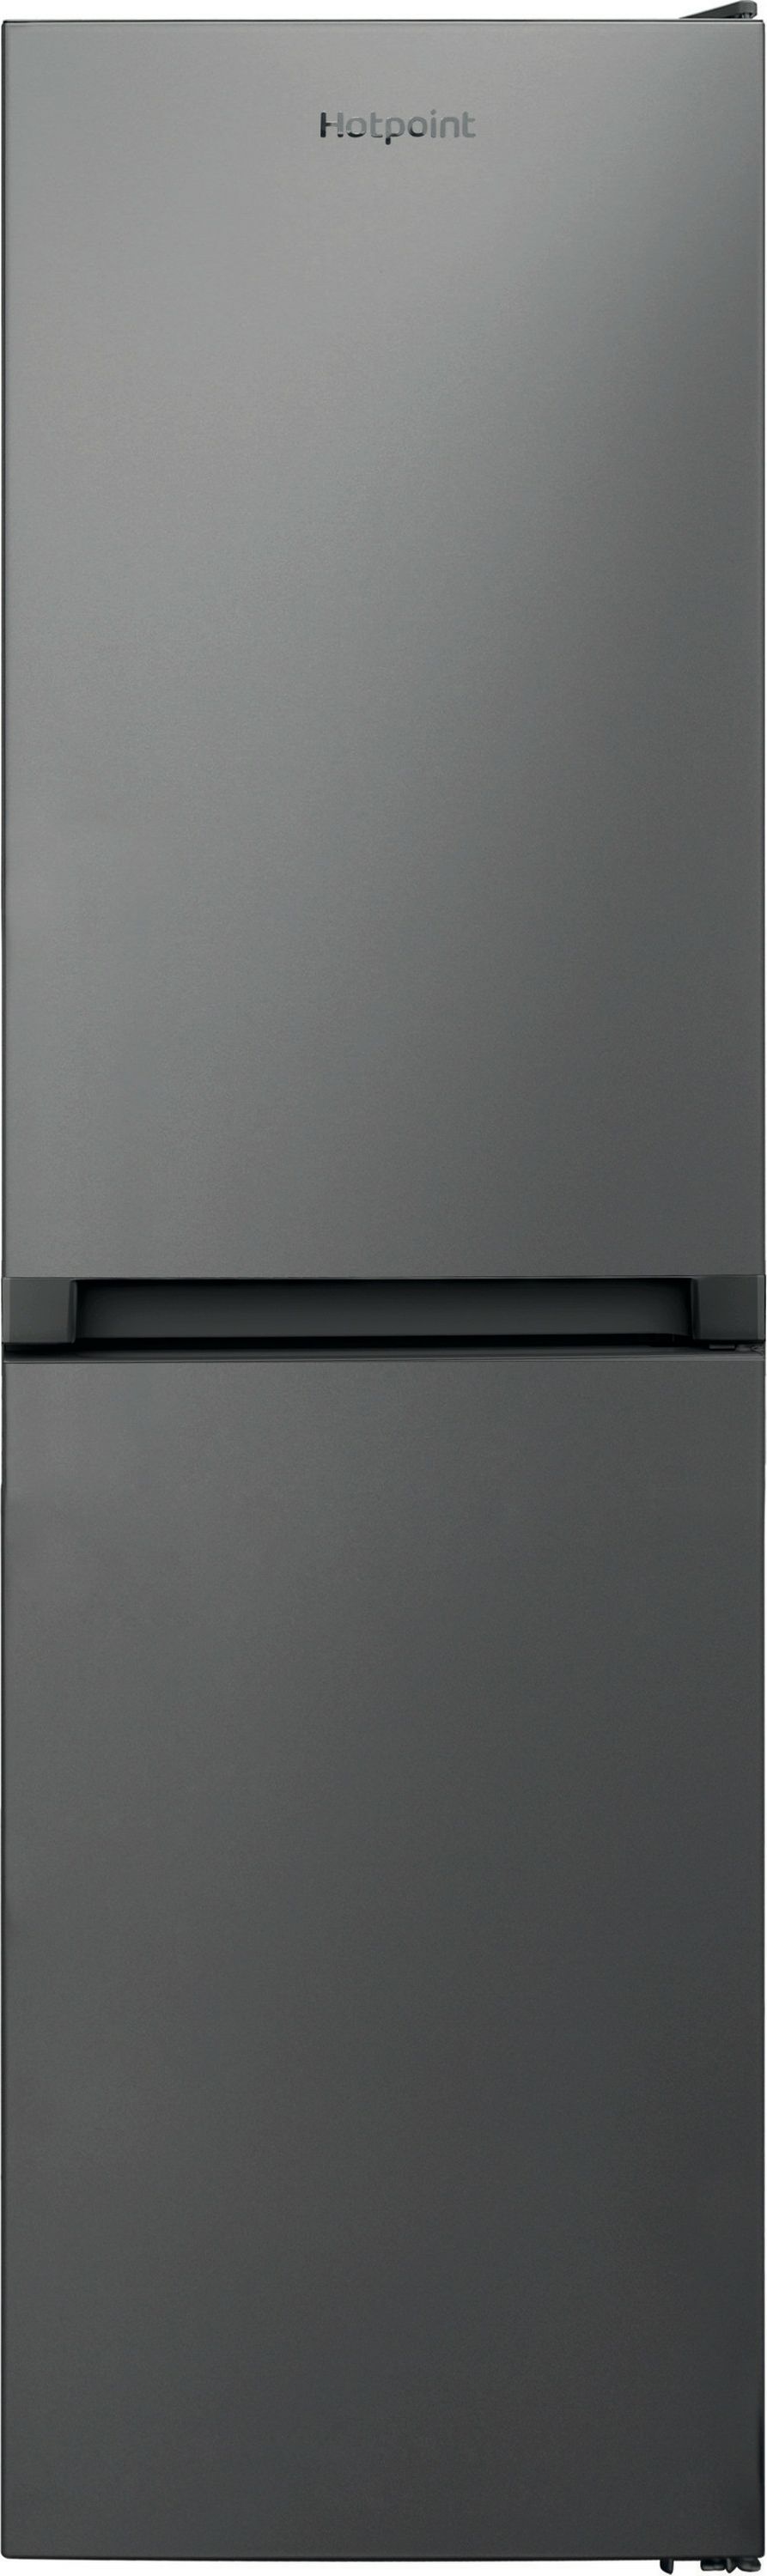 Hotpoint HBNF 55182 S UK 50/50 Frost Free Fridge Freezer - Silver - E Rated, Silver